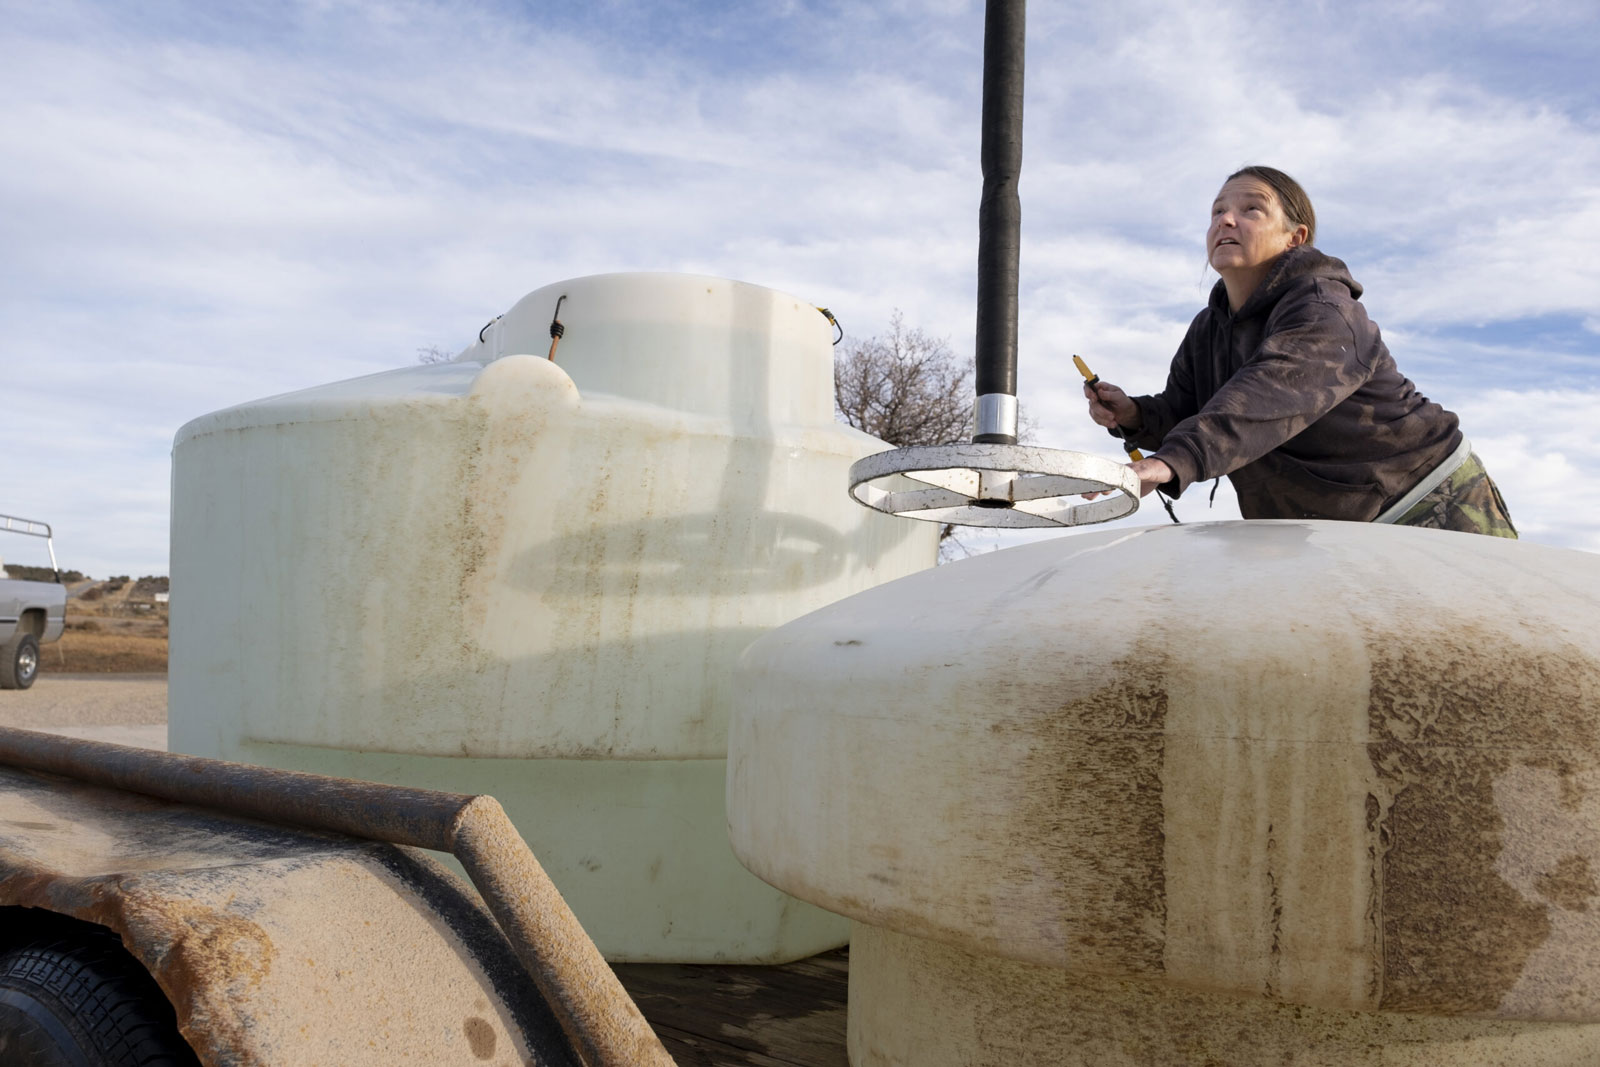 La Plata county residents fill up their water tanks at the La Plata Archuleta Water District’s bulk water fill station